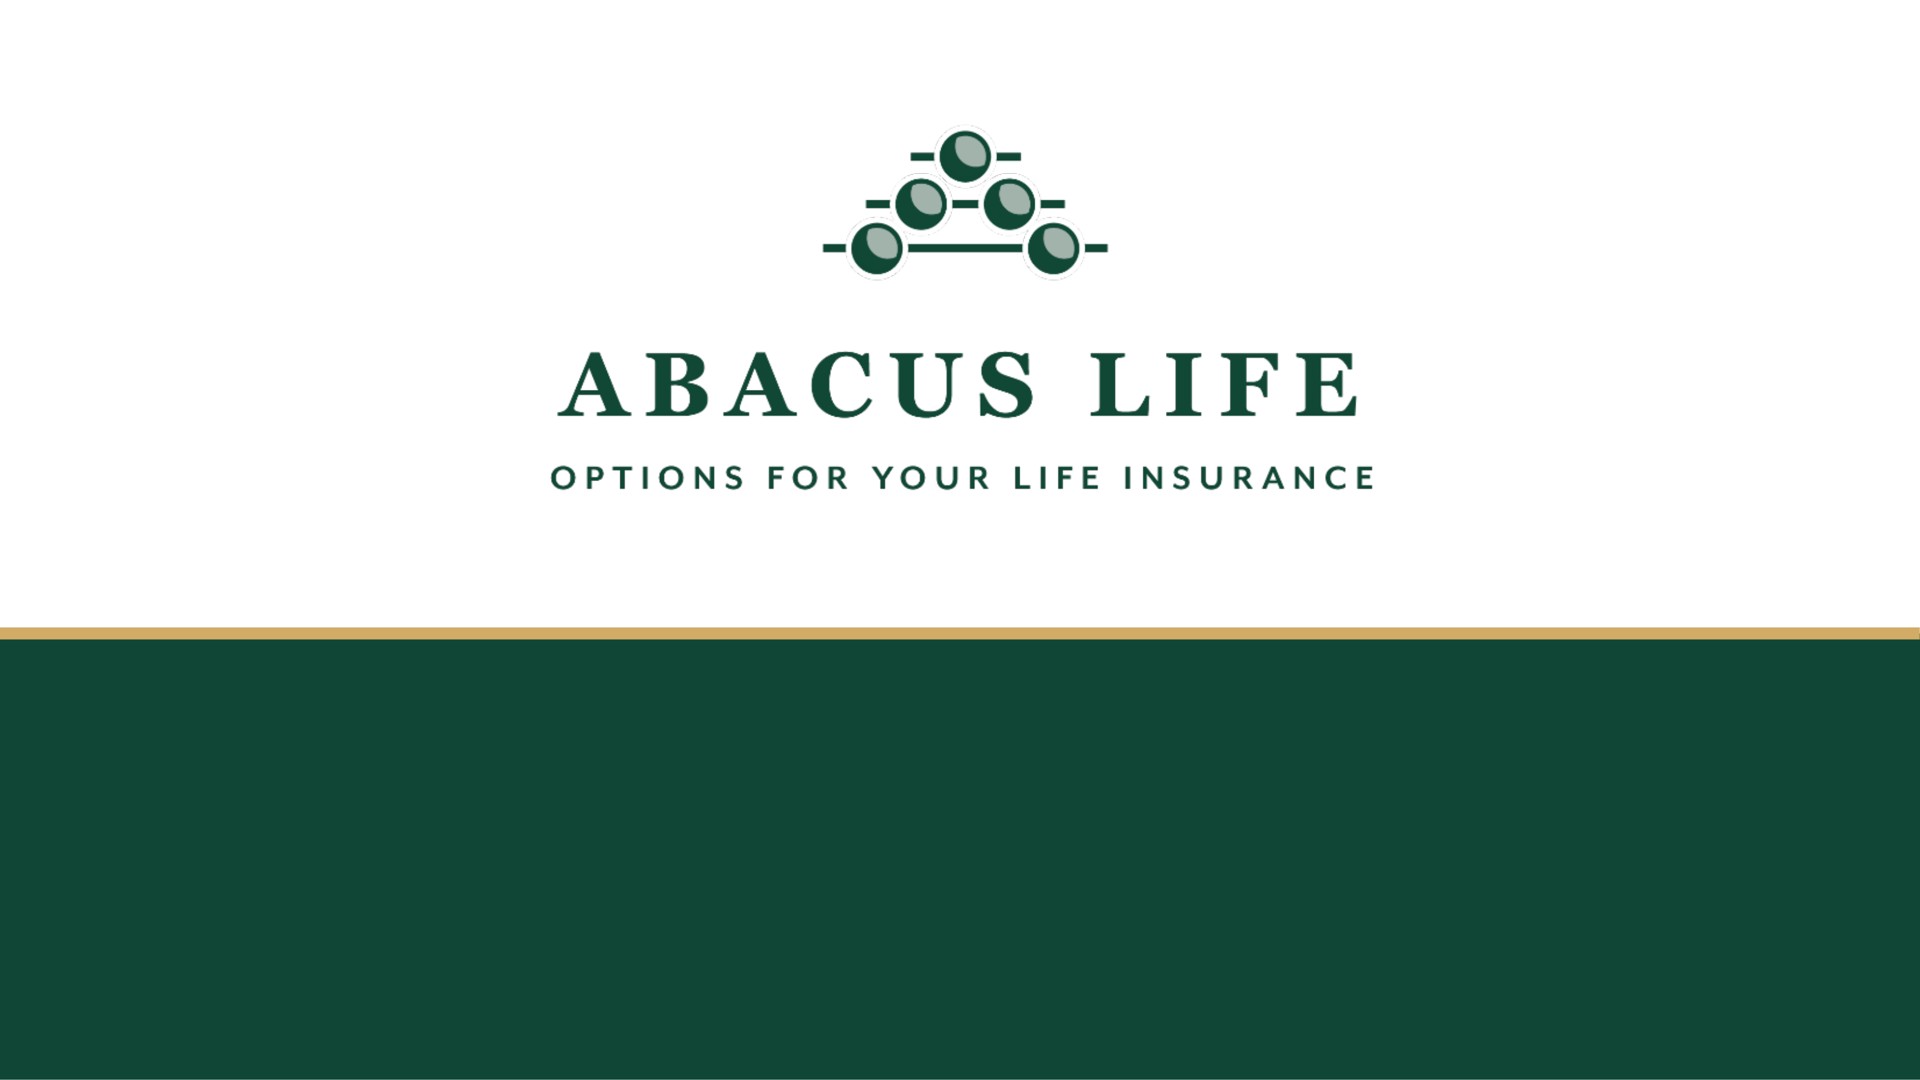 abacus life | Abacus Life